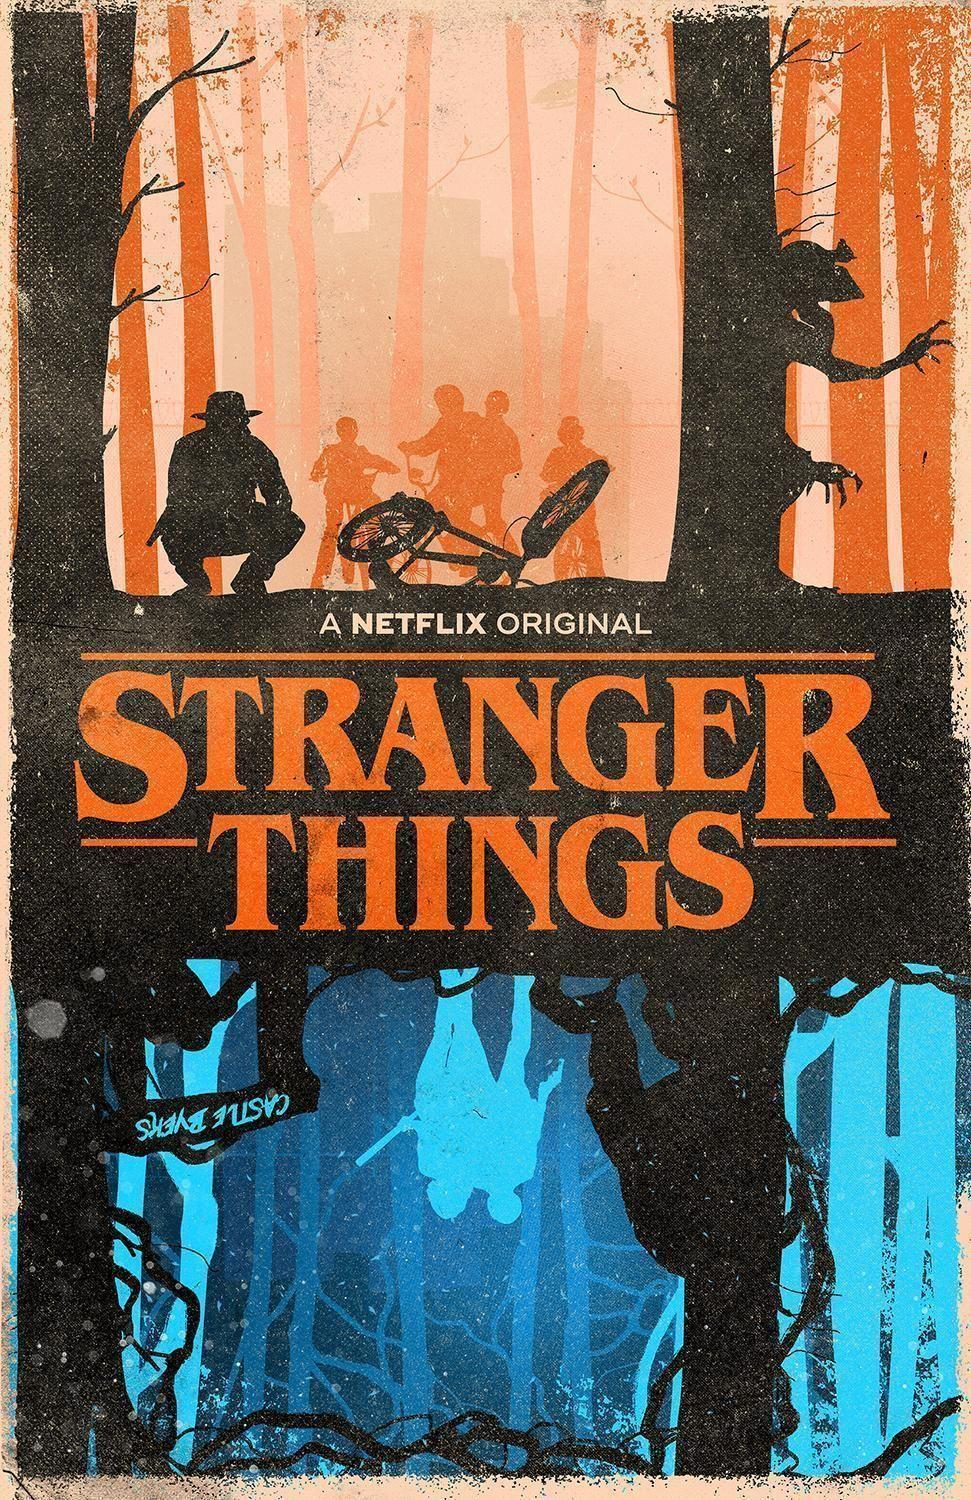 Download this awesome wallpaper. Stranger things